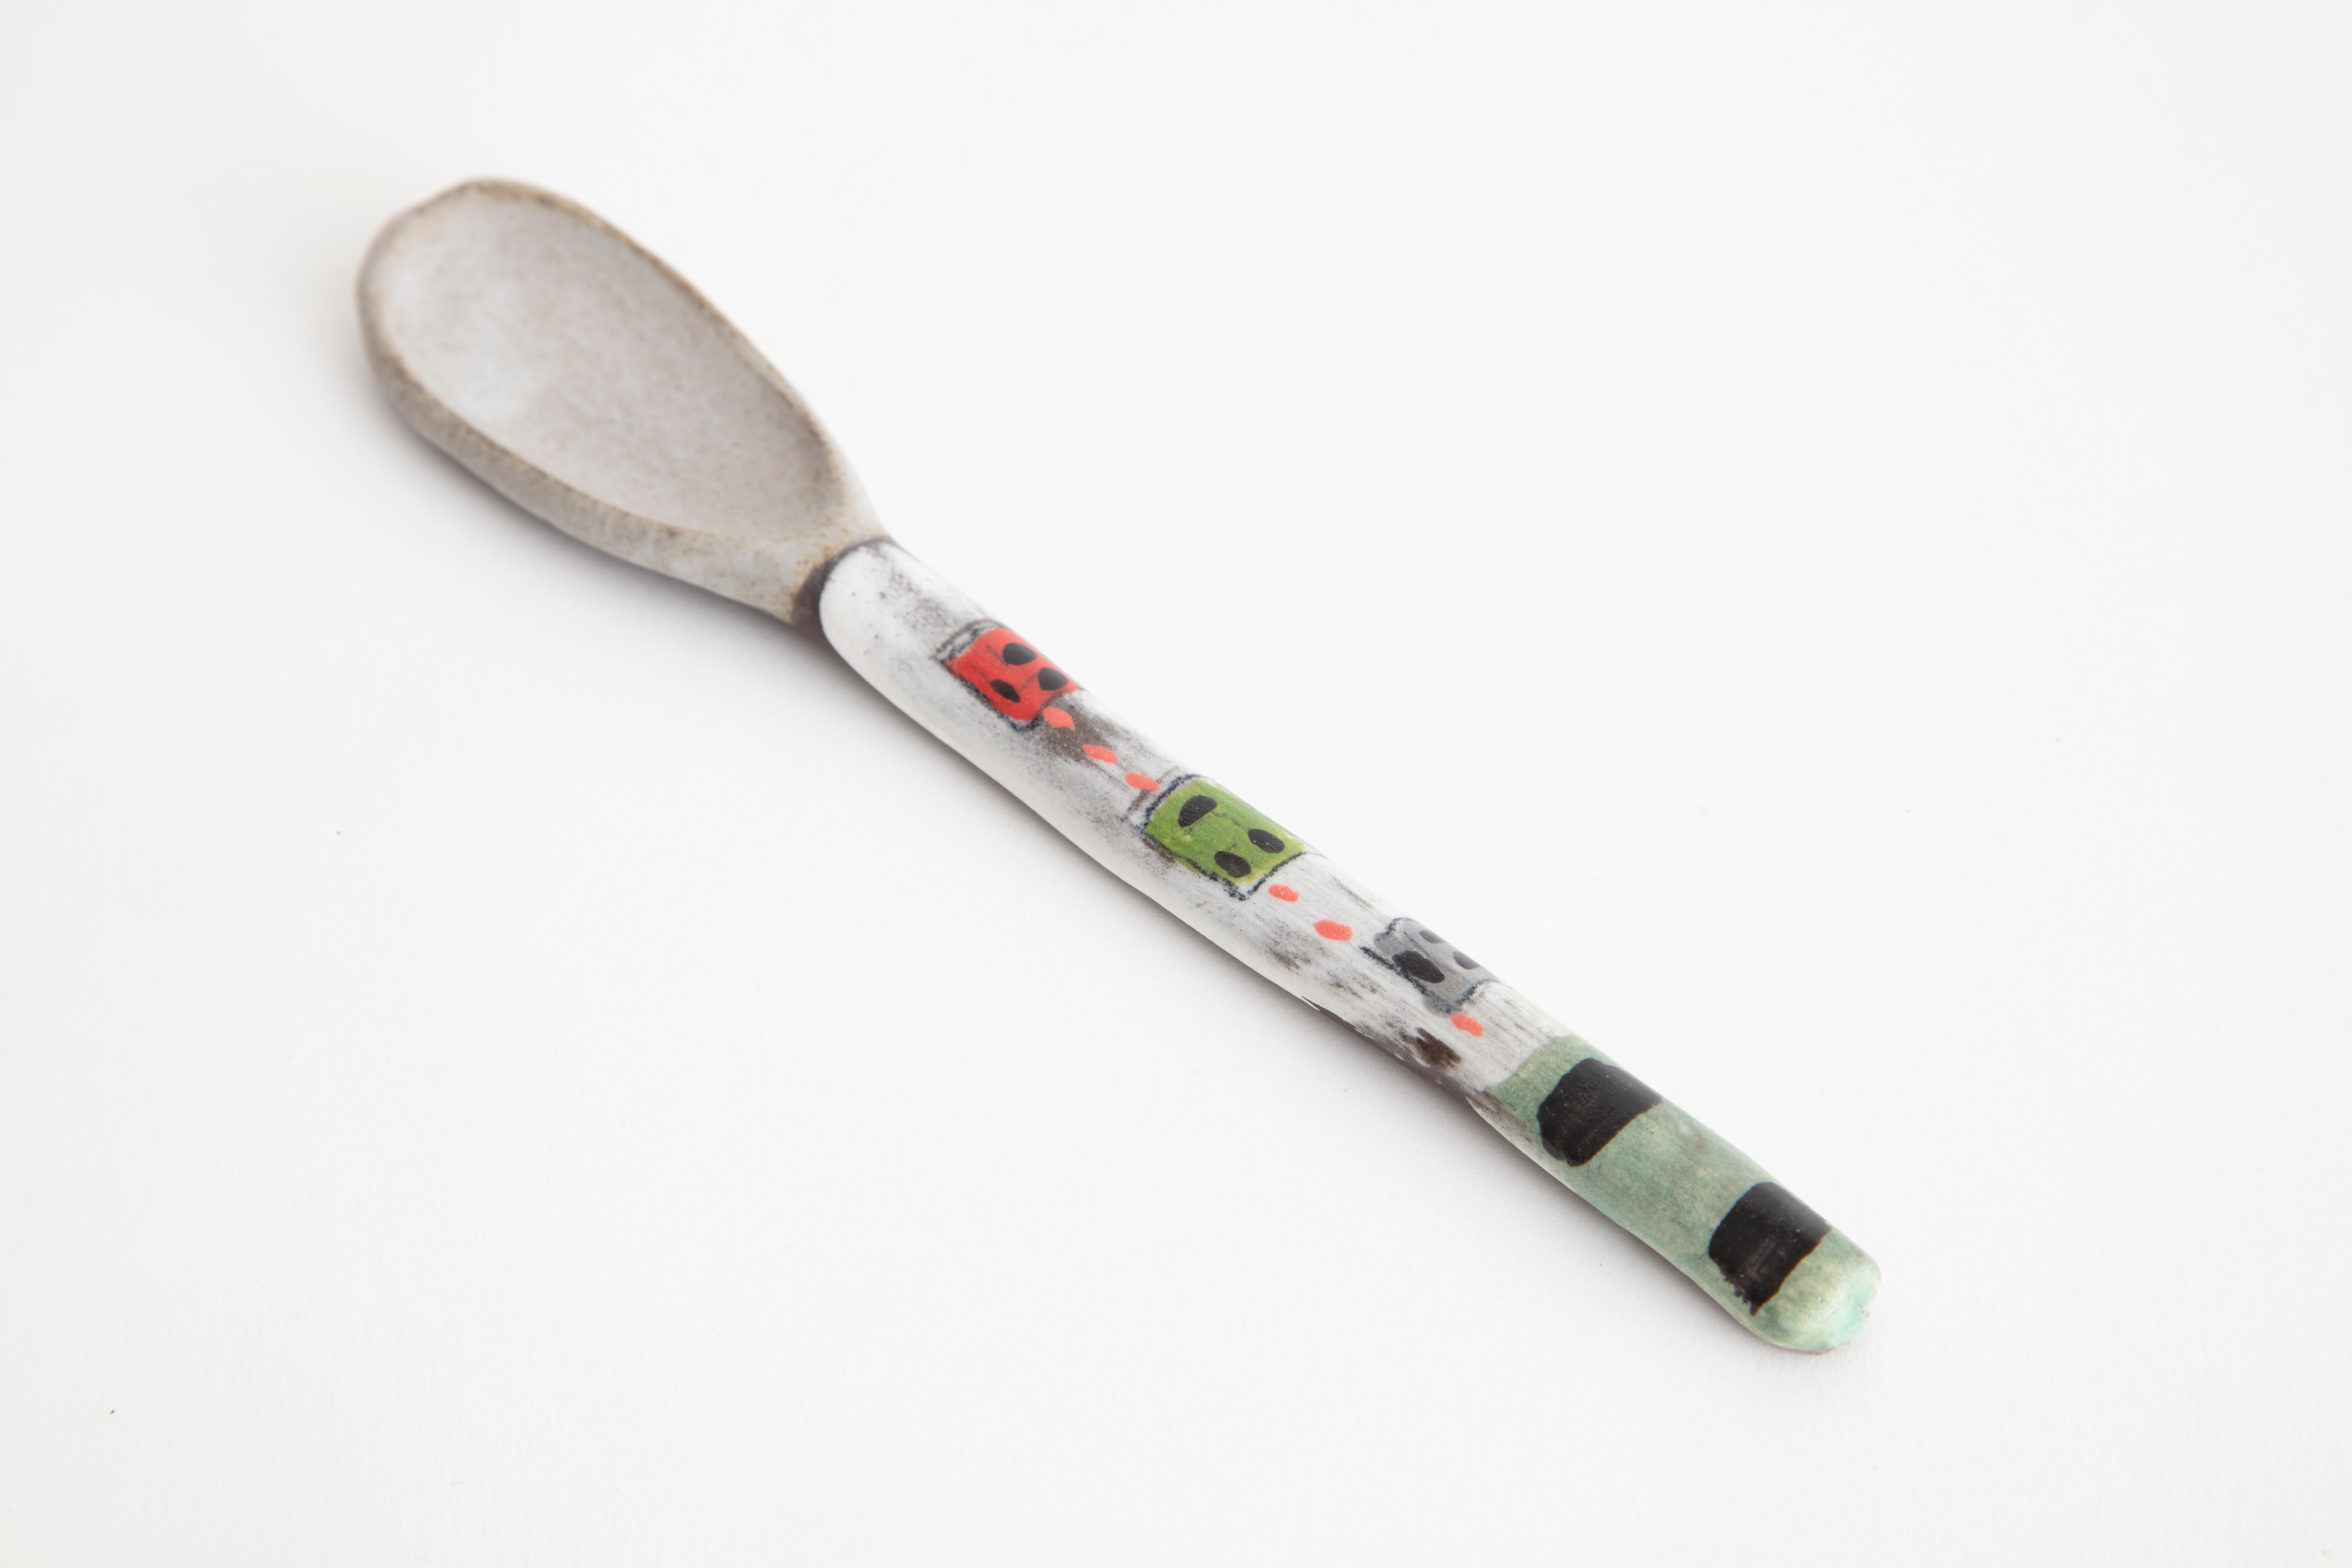 Part of the Surrealist-inspired show The Dinner Guests, each ceramic Smiley Spoon is hand painted with anthropomorphic shapes and playful, brightly-colored patterns. 1 of 9.

Handmade by Shino Takeda
Materials: Hand painted ceramic
Dimensions: H